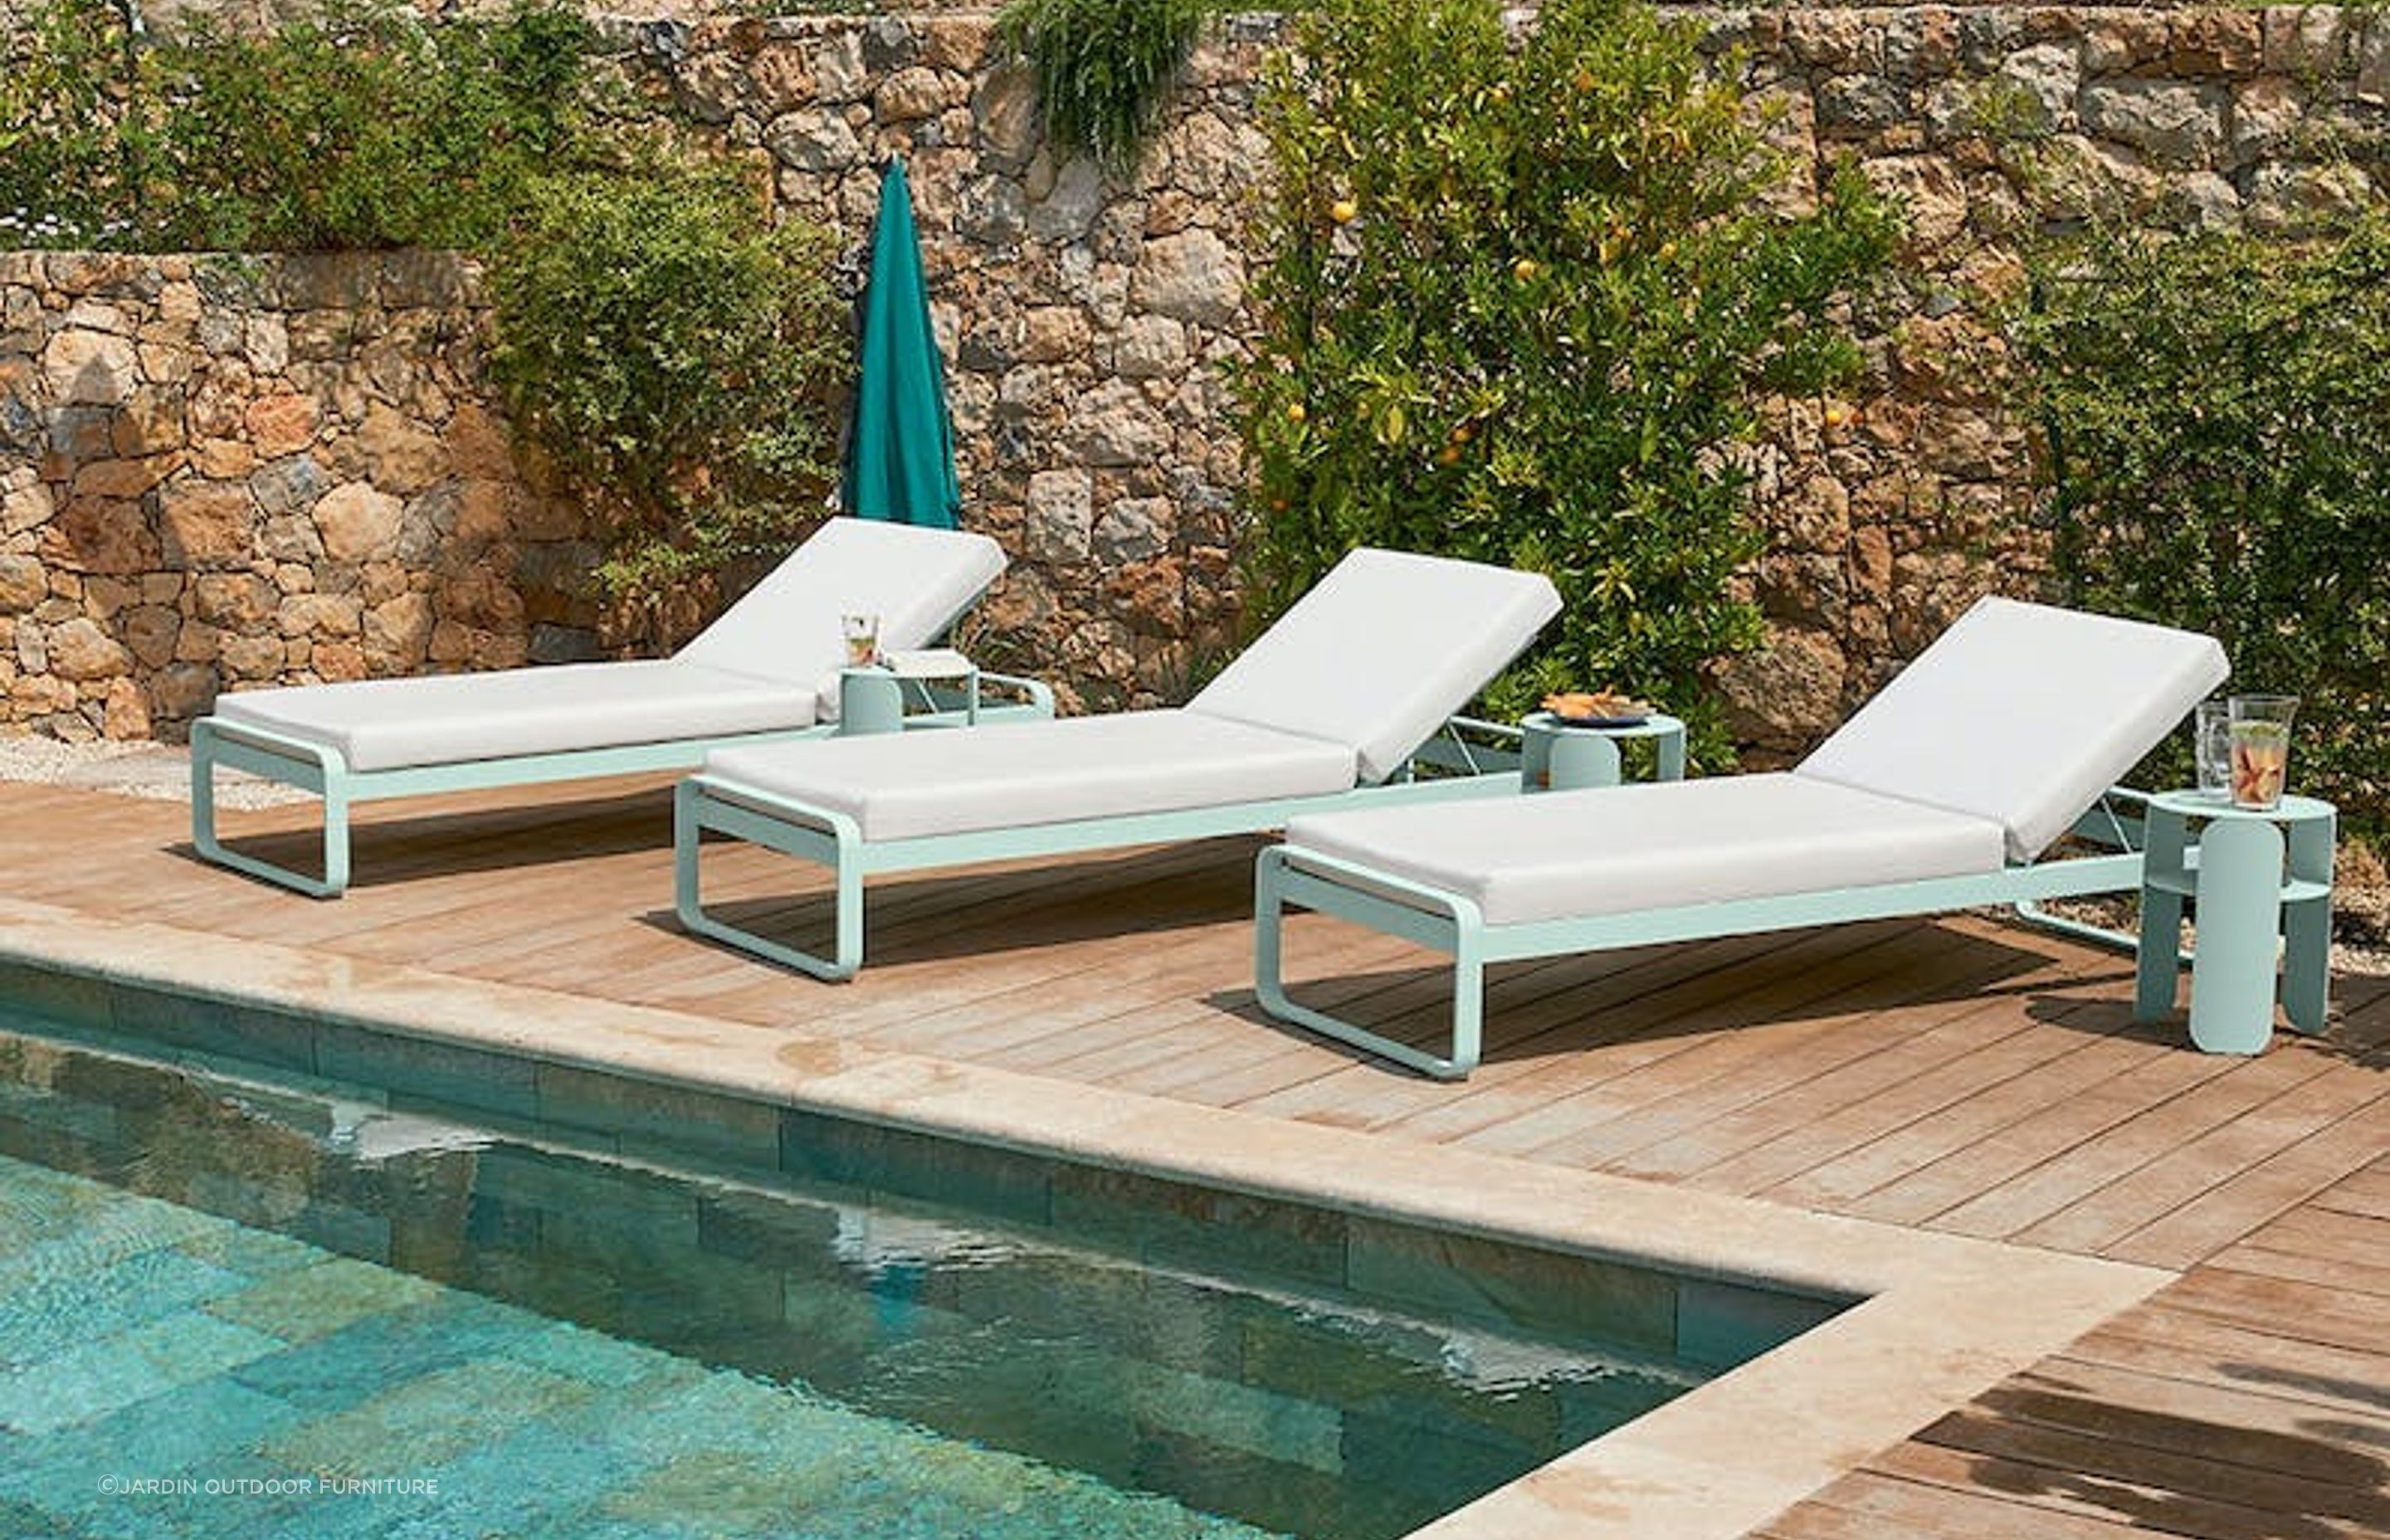 The Bellevie premium sunlounger is the ultimate in poolside comfort. You'll never want to leave!